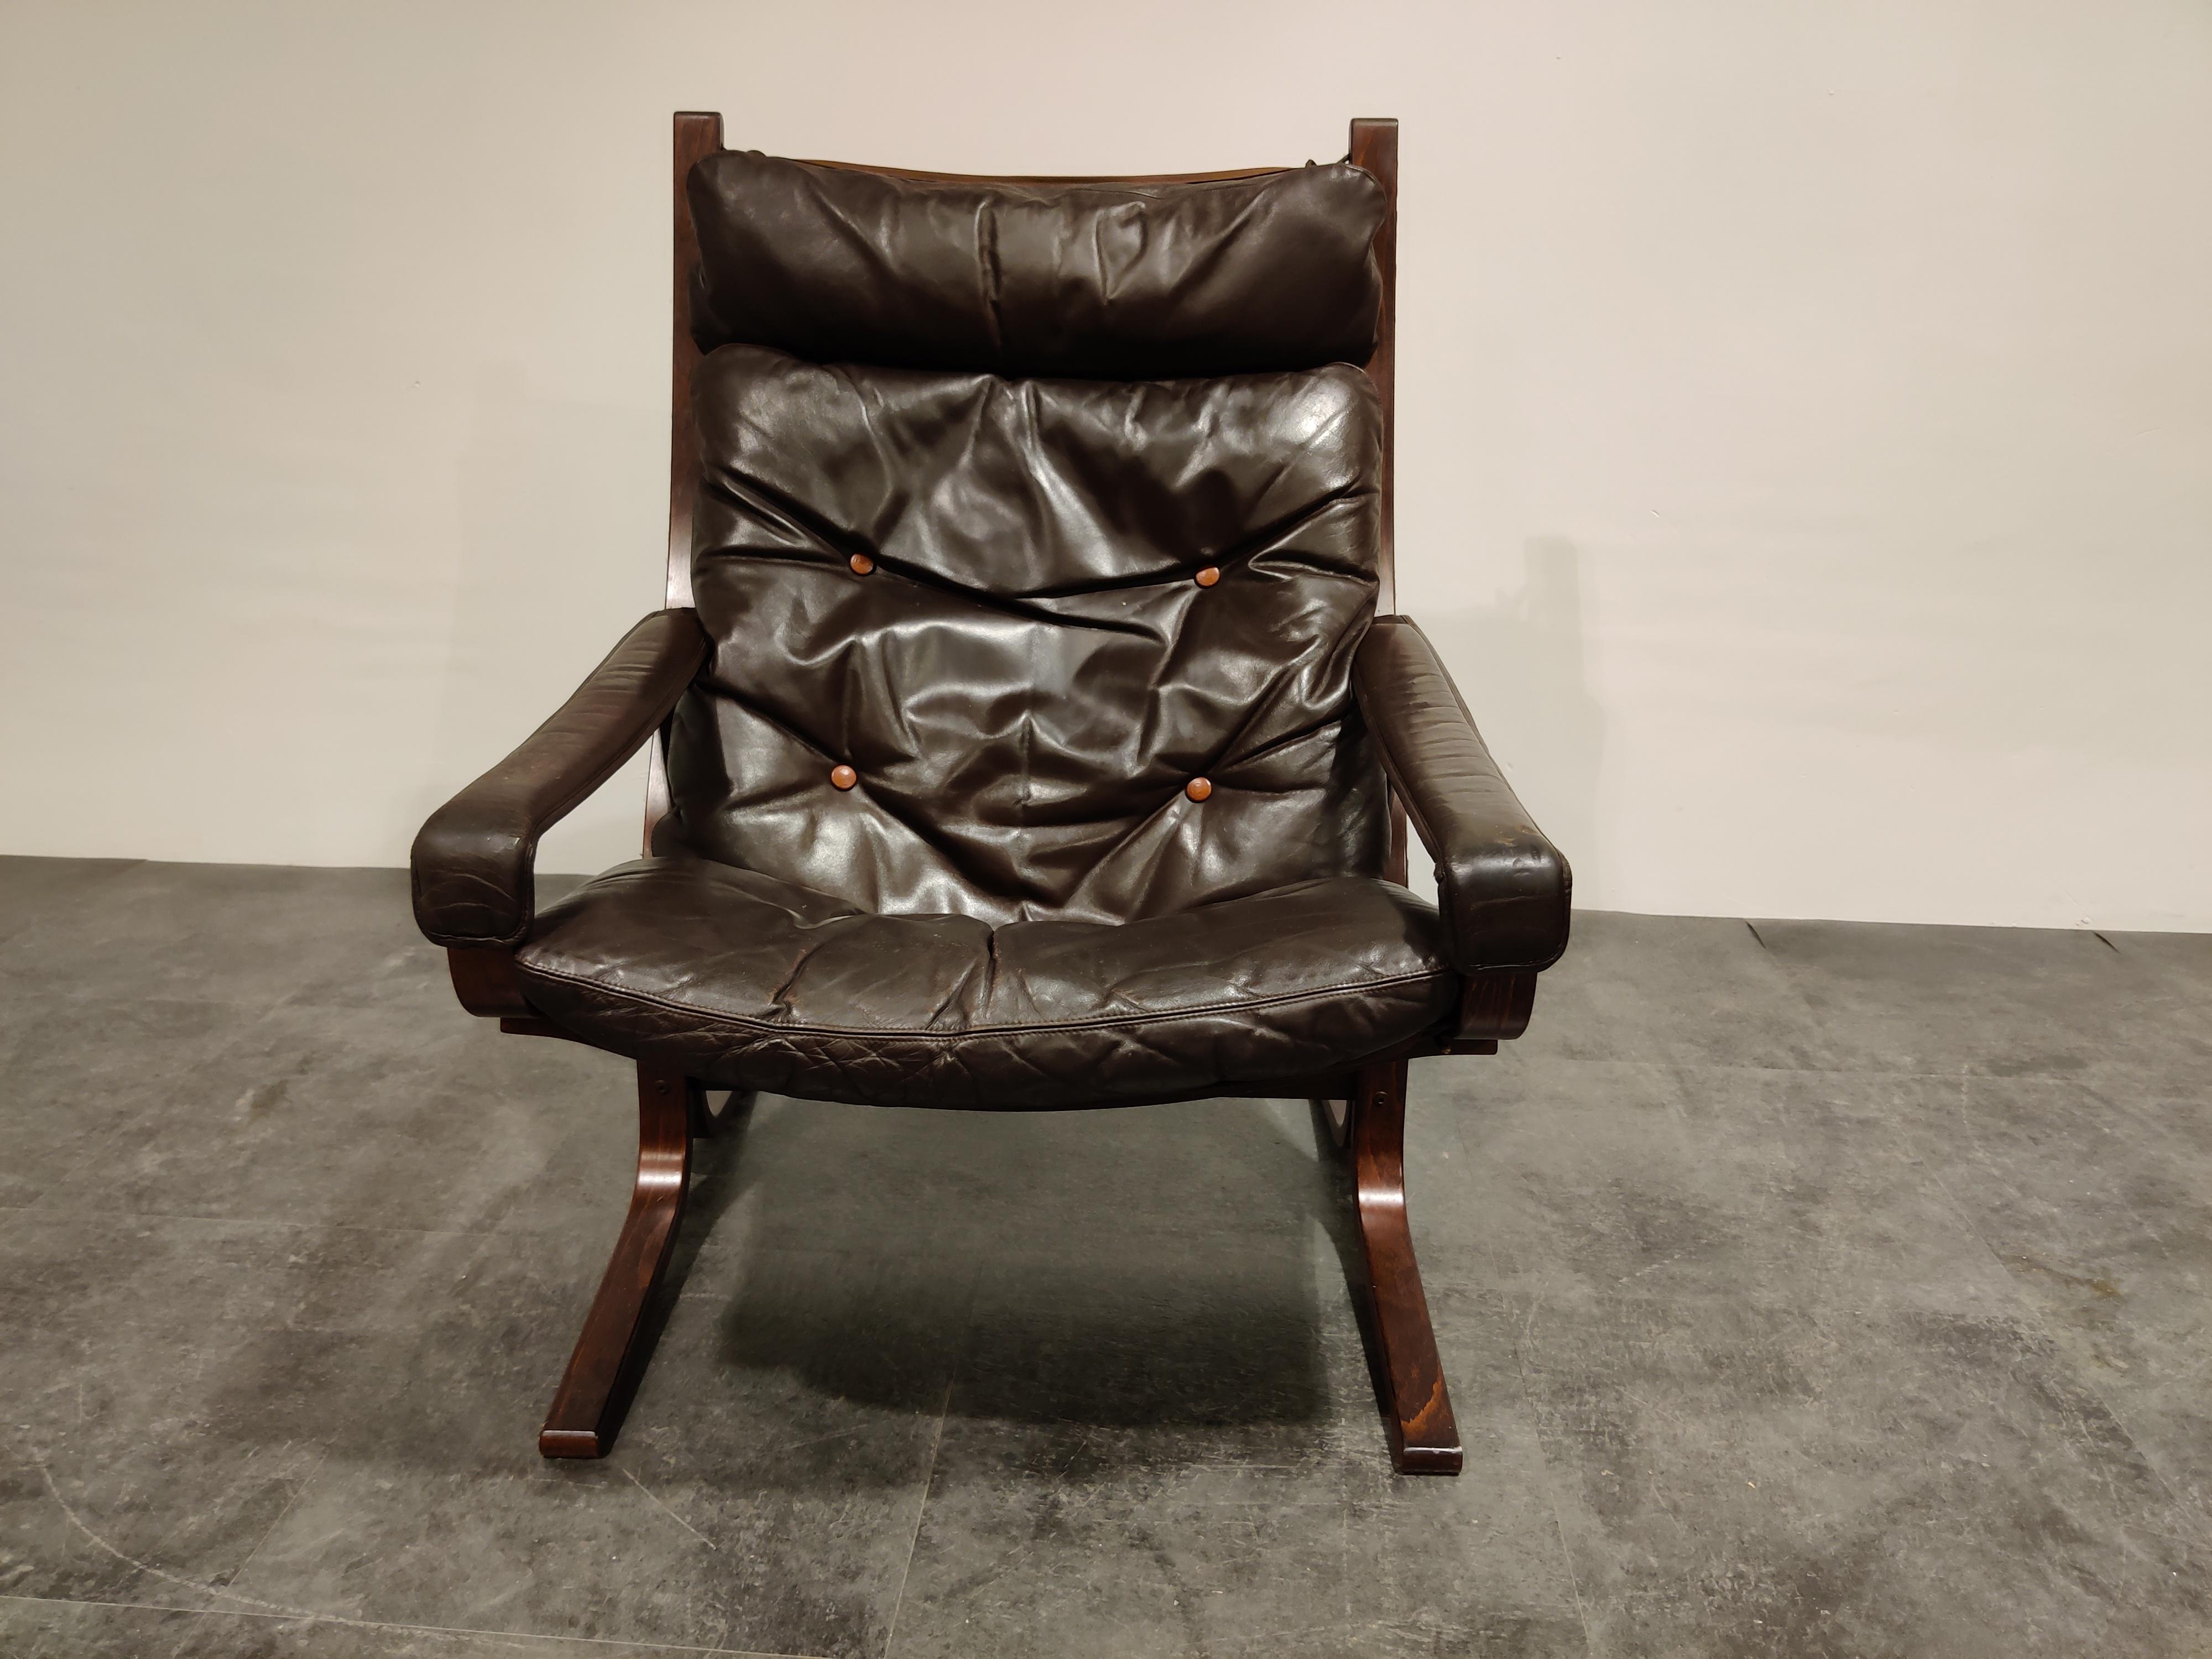 Vintage dark brown leather siesta chair designed by Ingmar Relling for Westnofa.

This very comfortable chair consists of brown leather cushions on a beautiful rosewood frame.

Right patina

1970s, Norway.

Perfect